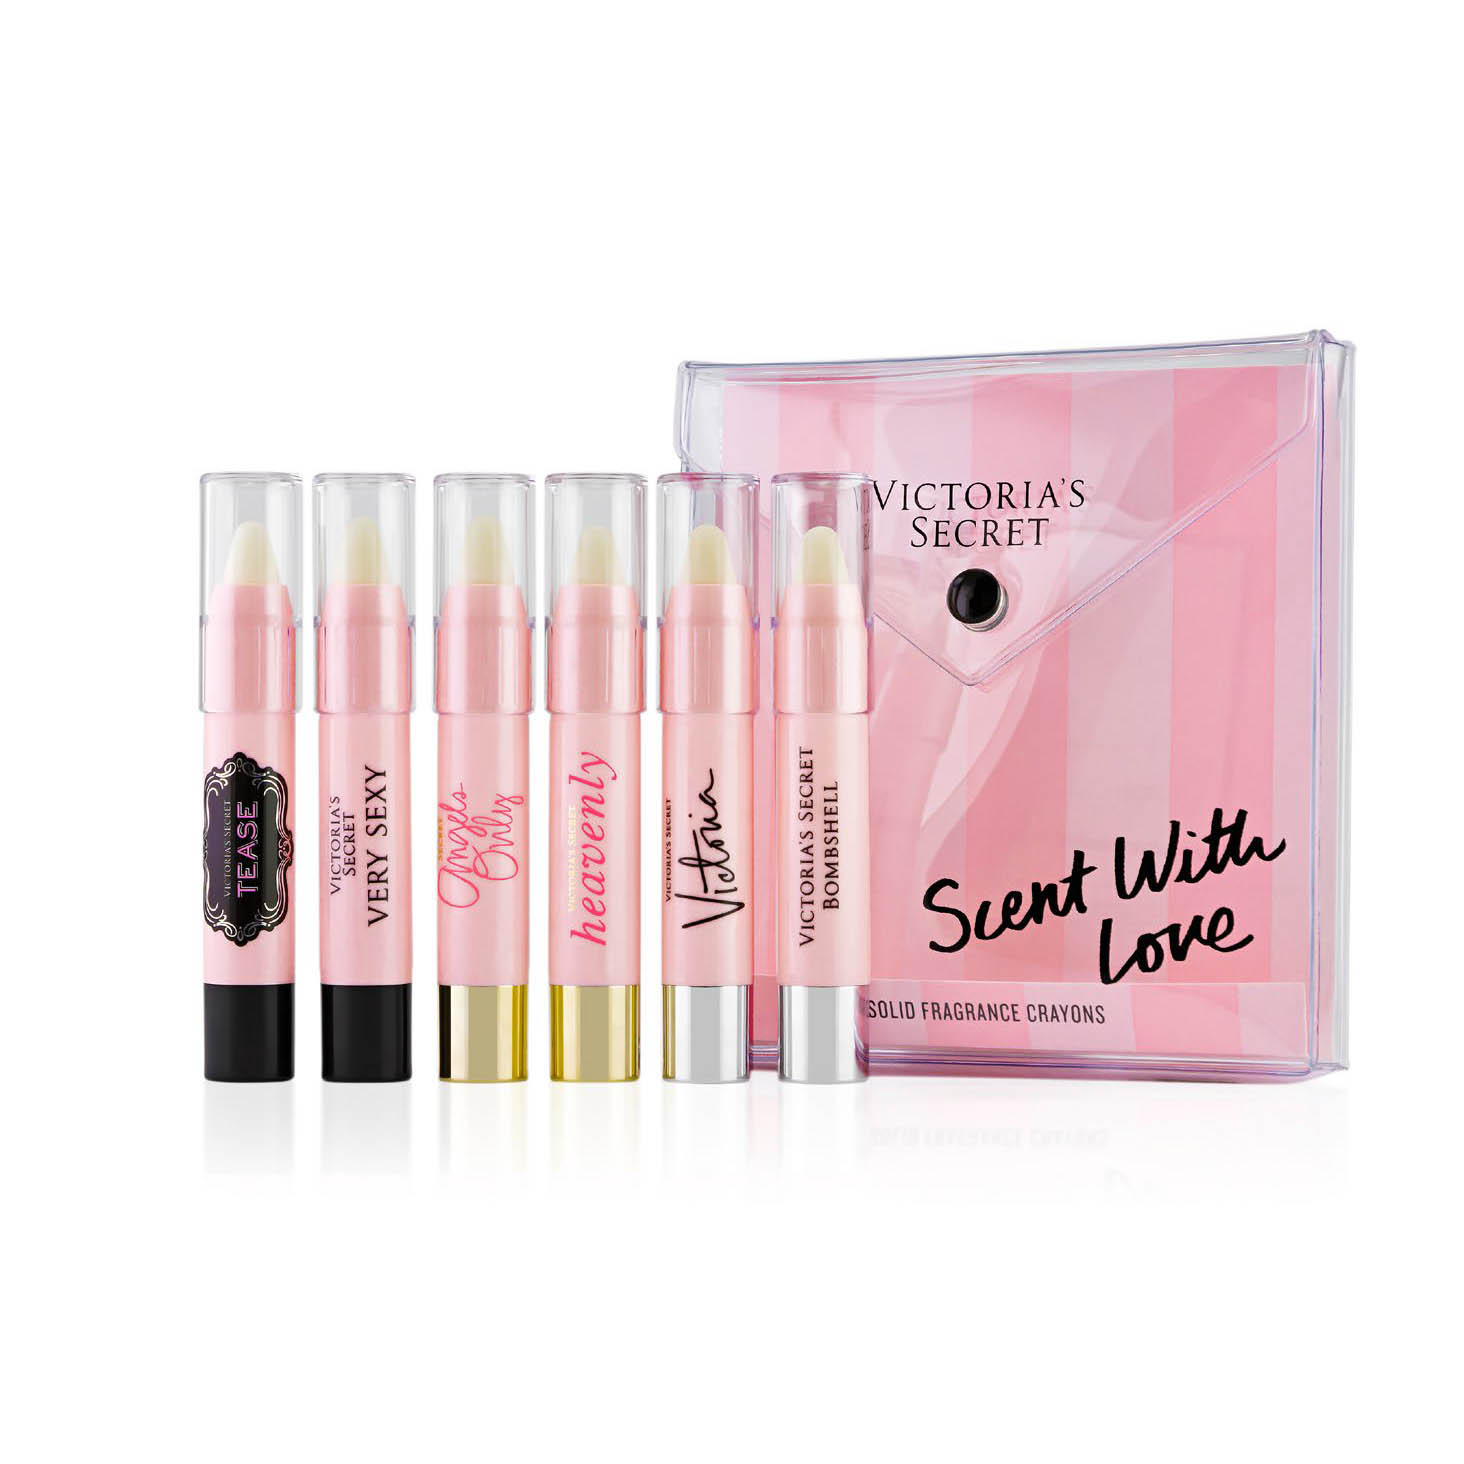 Victoria's Secret Fragrance Crayons Set of 6 - Scent With Love - W...